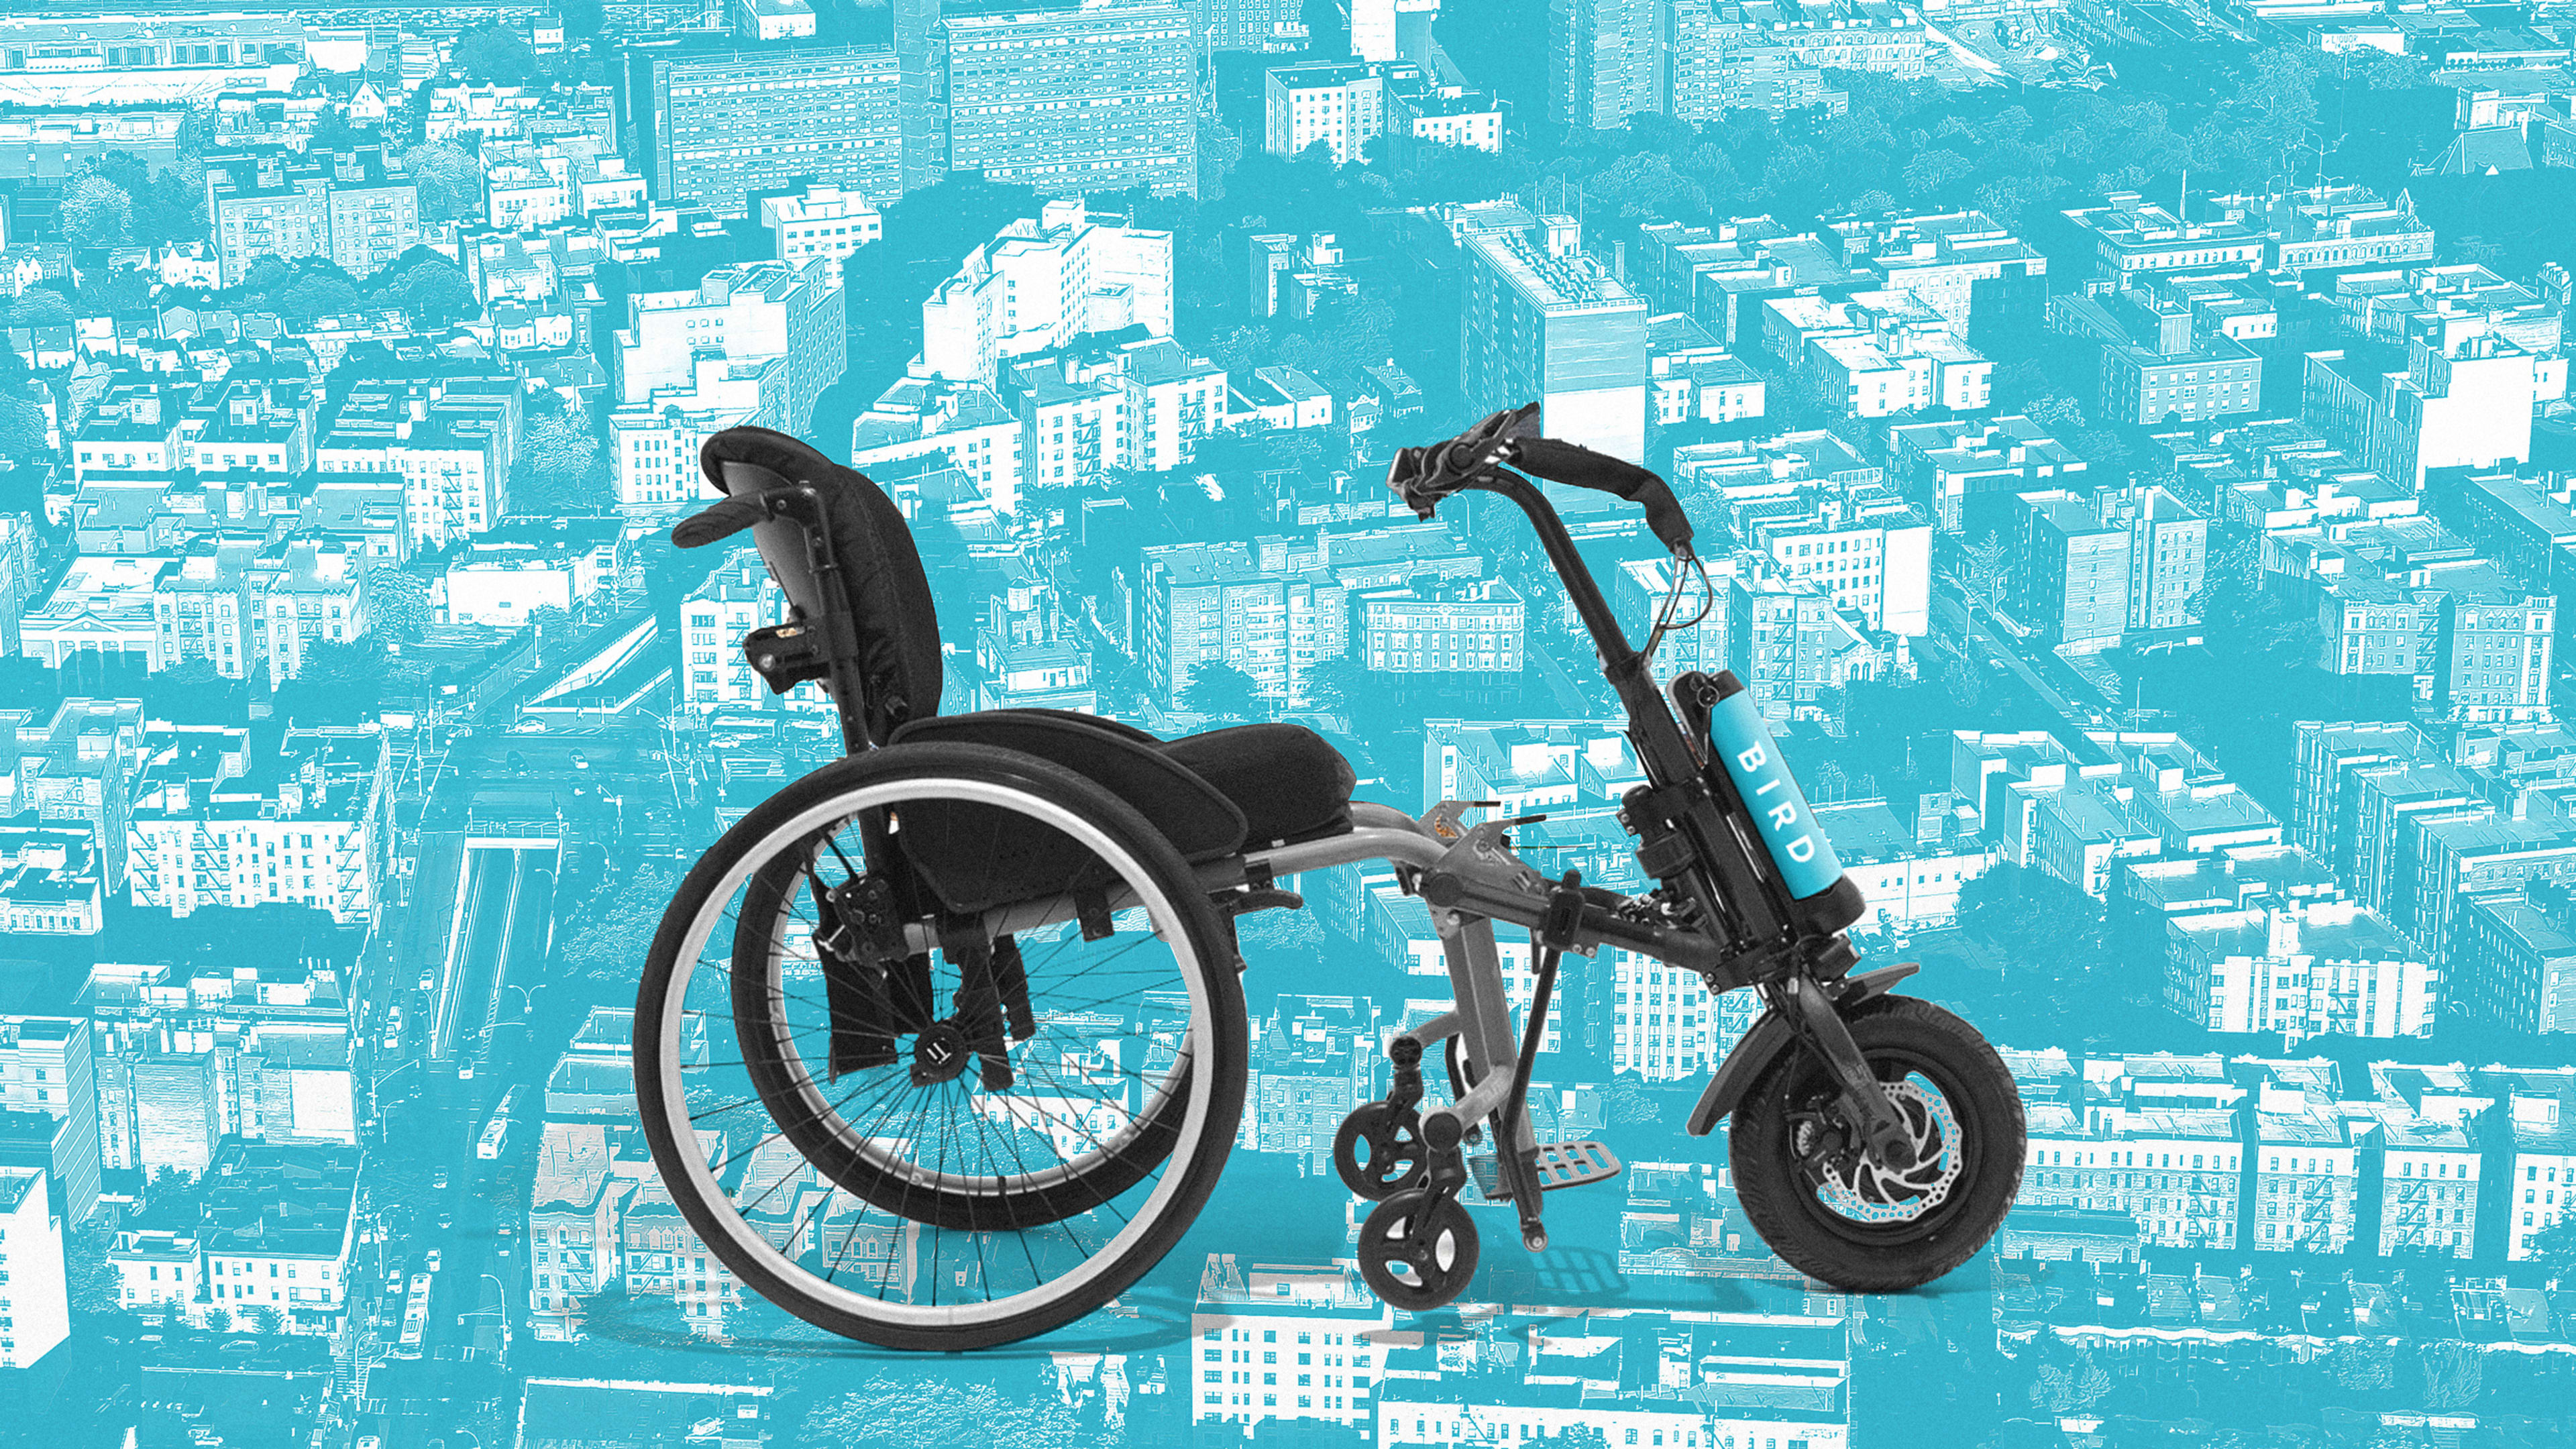 This motor attachment from Bird turns manual wheelchairs electric